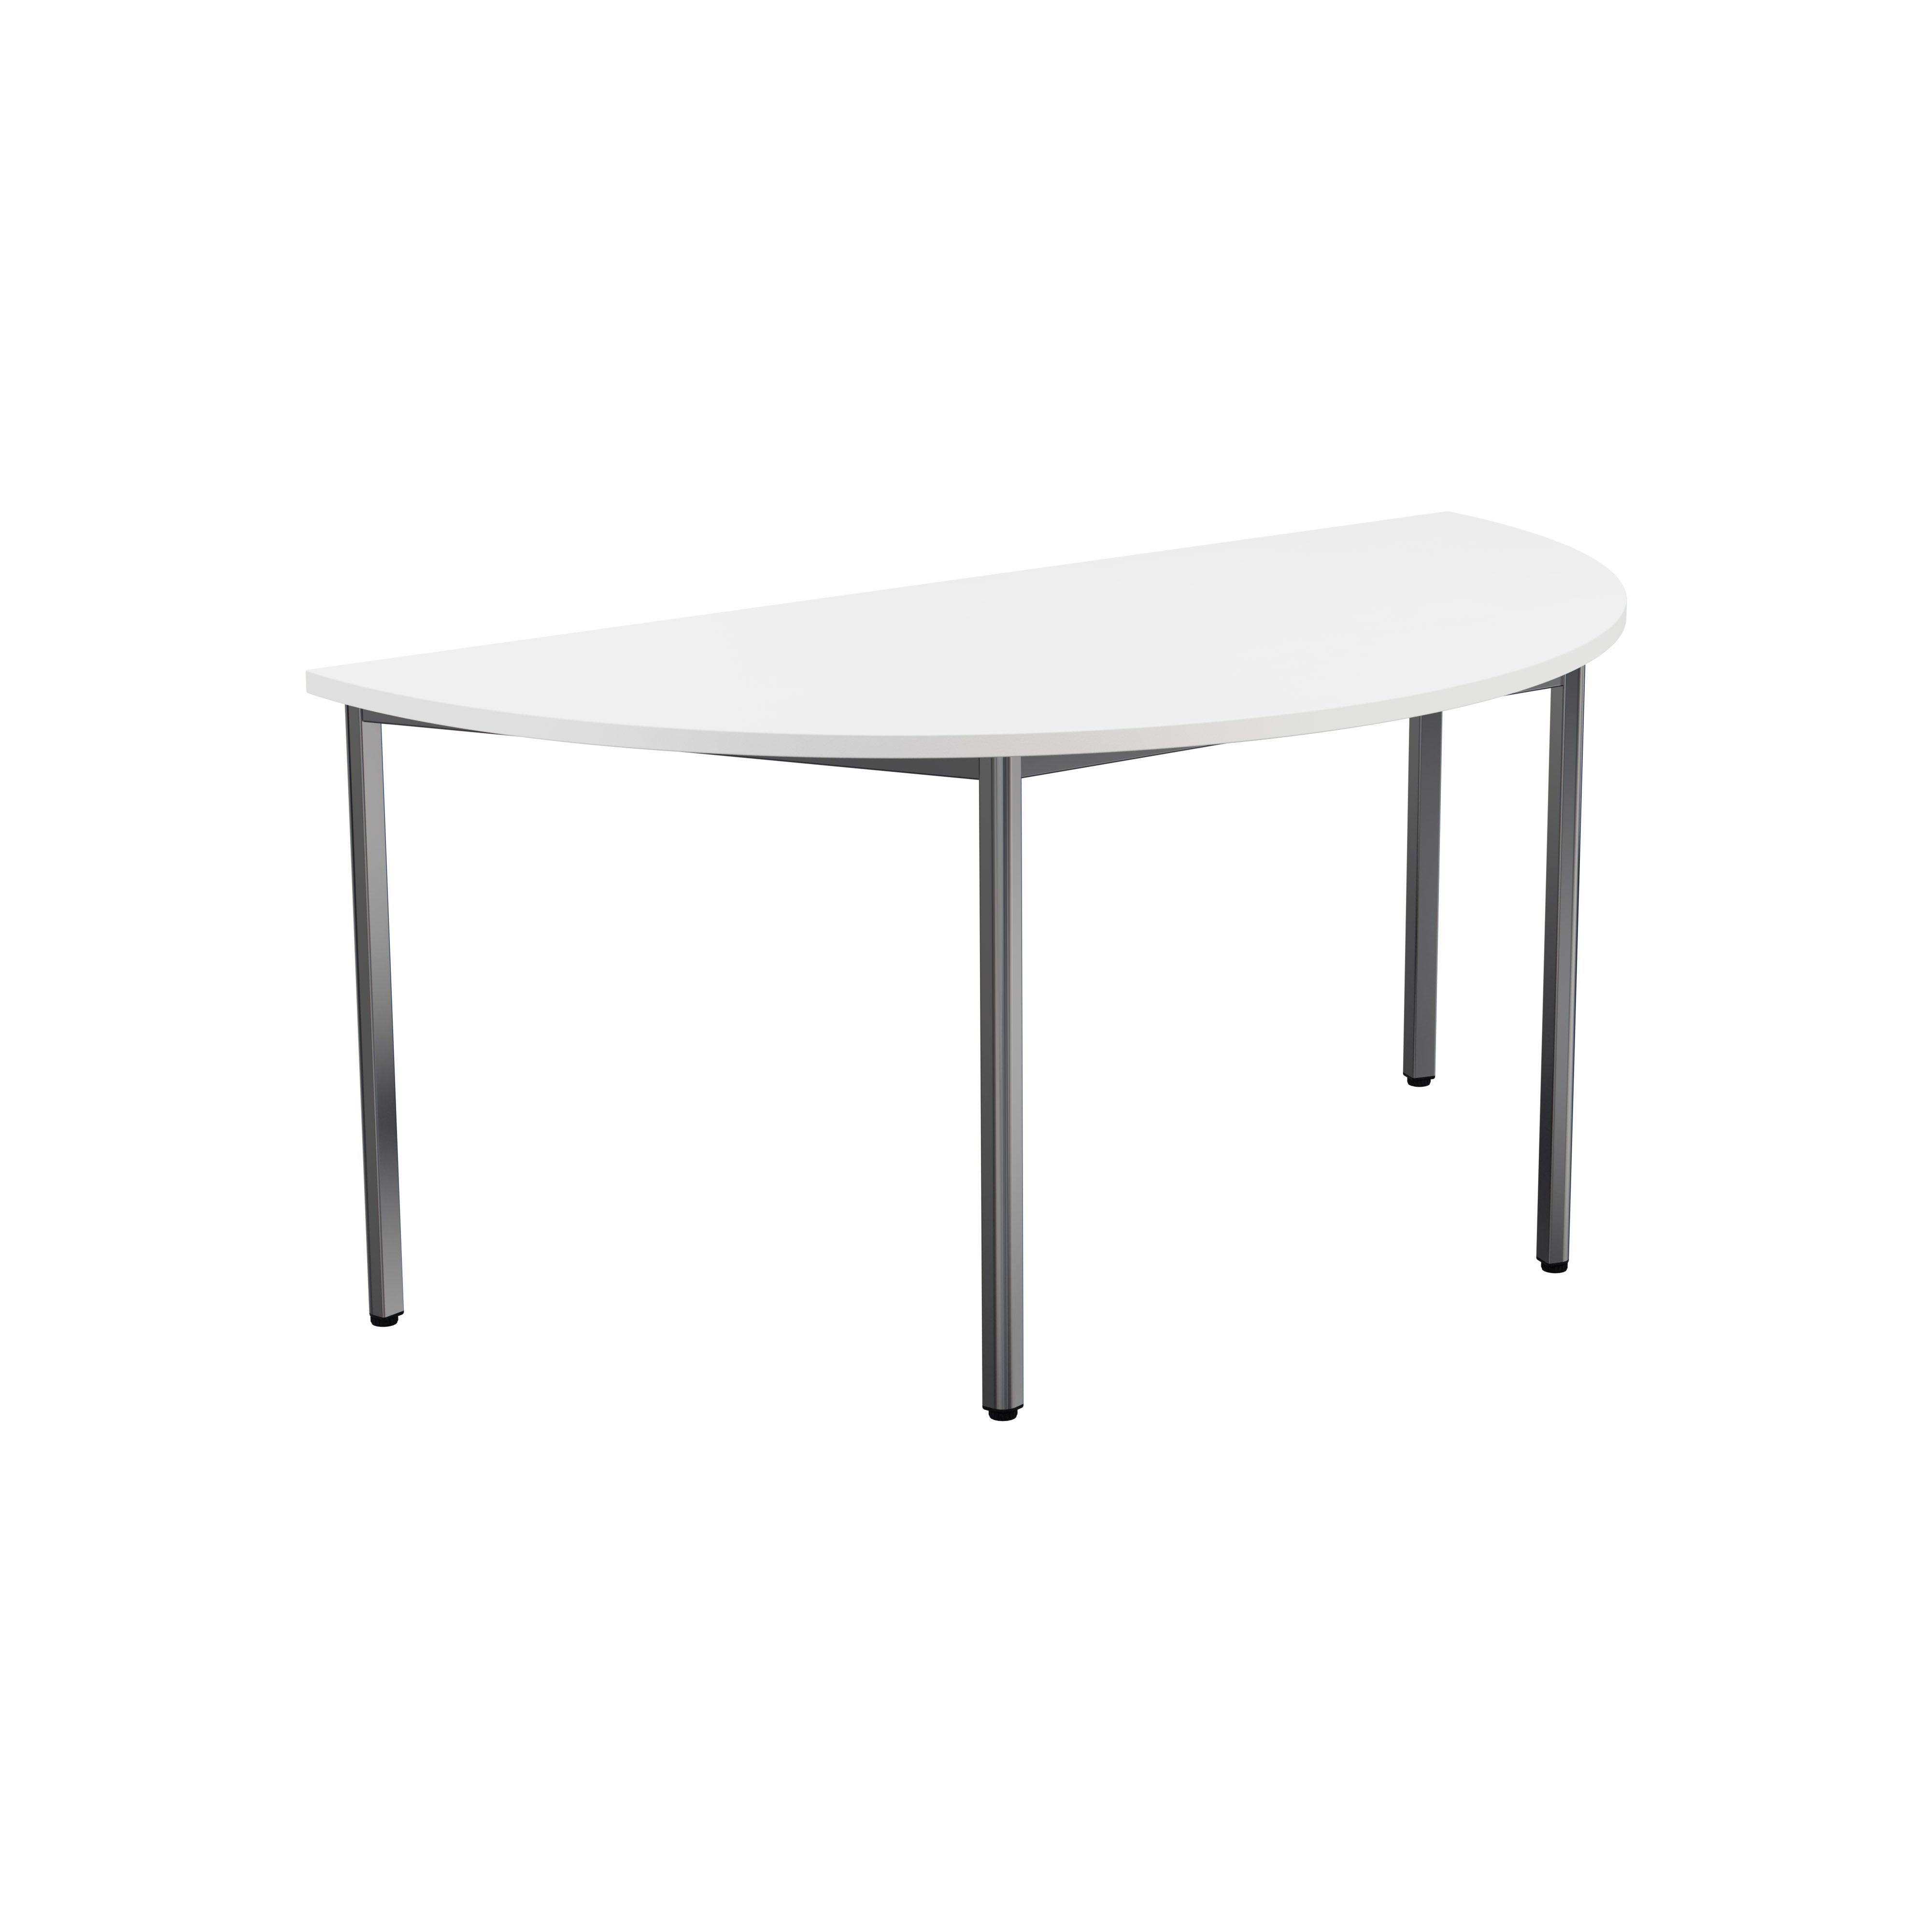 Summit Semi Circular Table White - Office Furniture Solutions